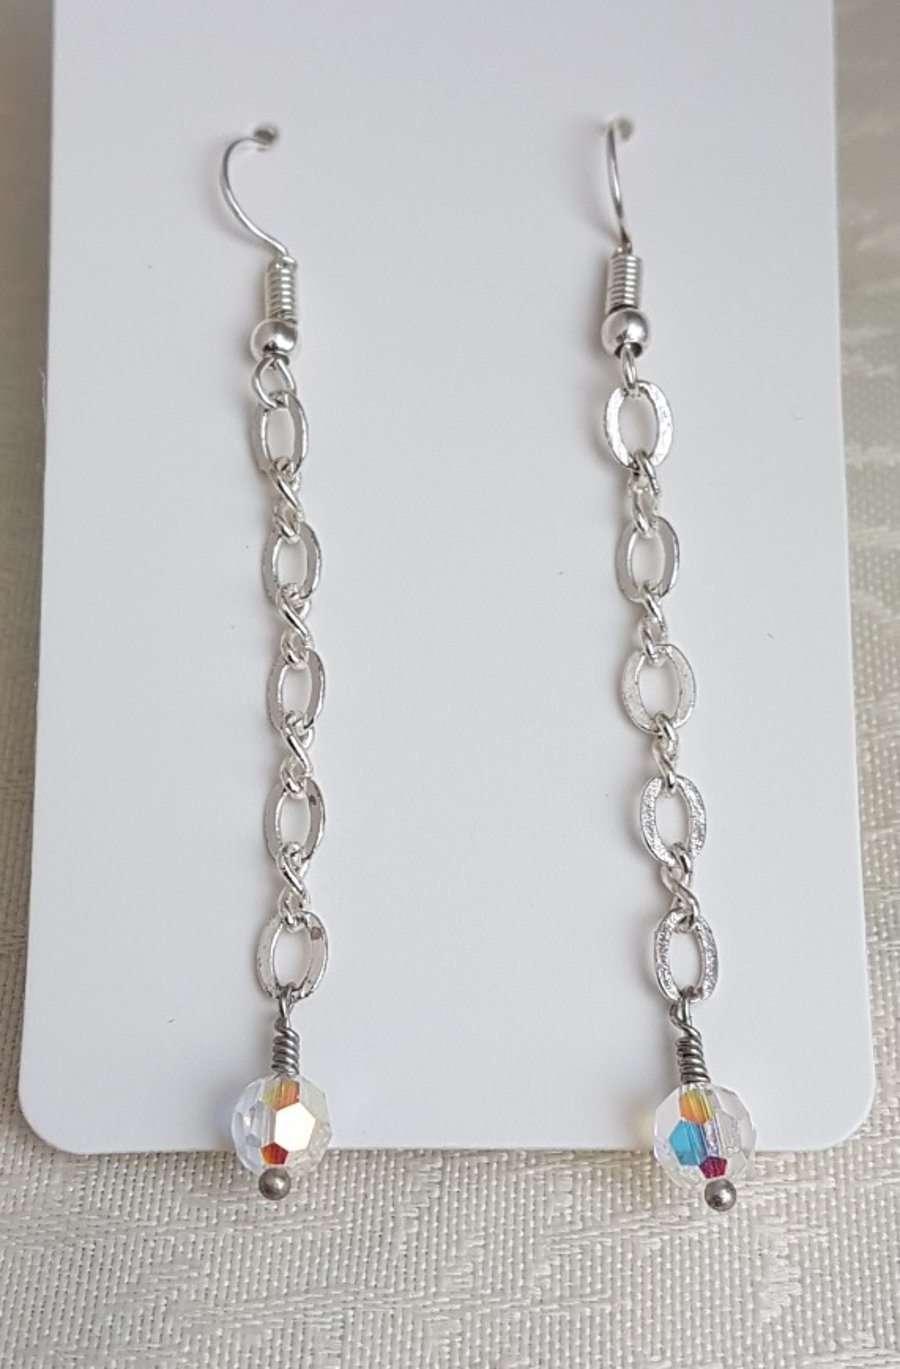 Gorgeous Chain and Crystal Earrings.